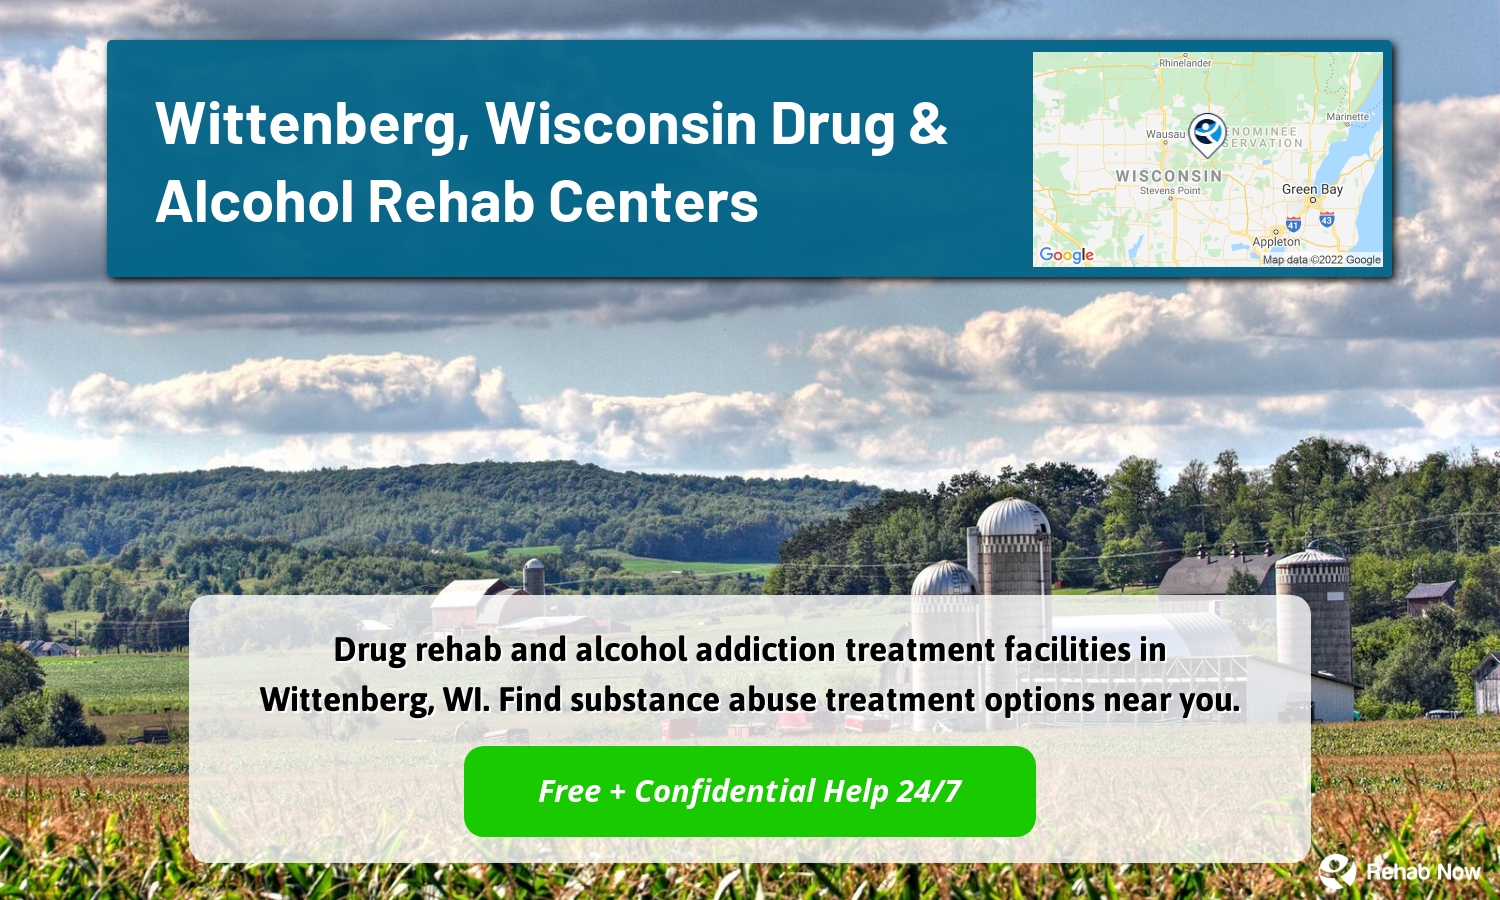 Drug rehab and alcohol addiction treatment facilities in Wittenberg, WI. Find substance abuse treatment options near you.